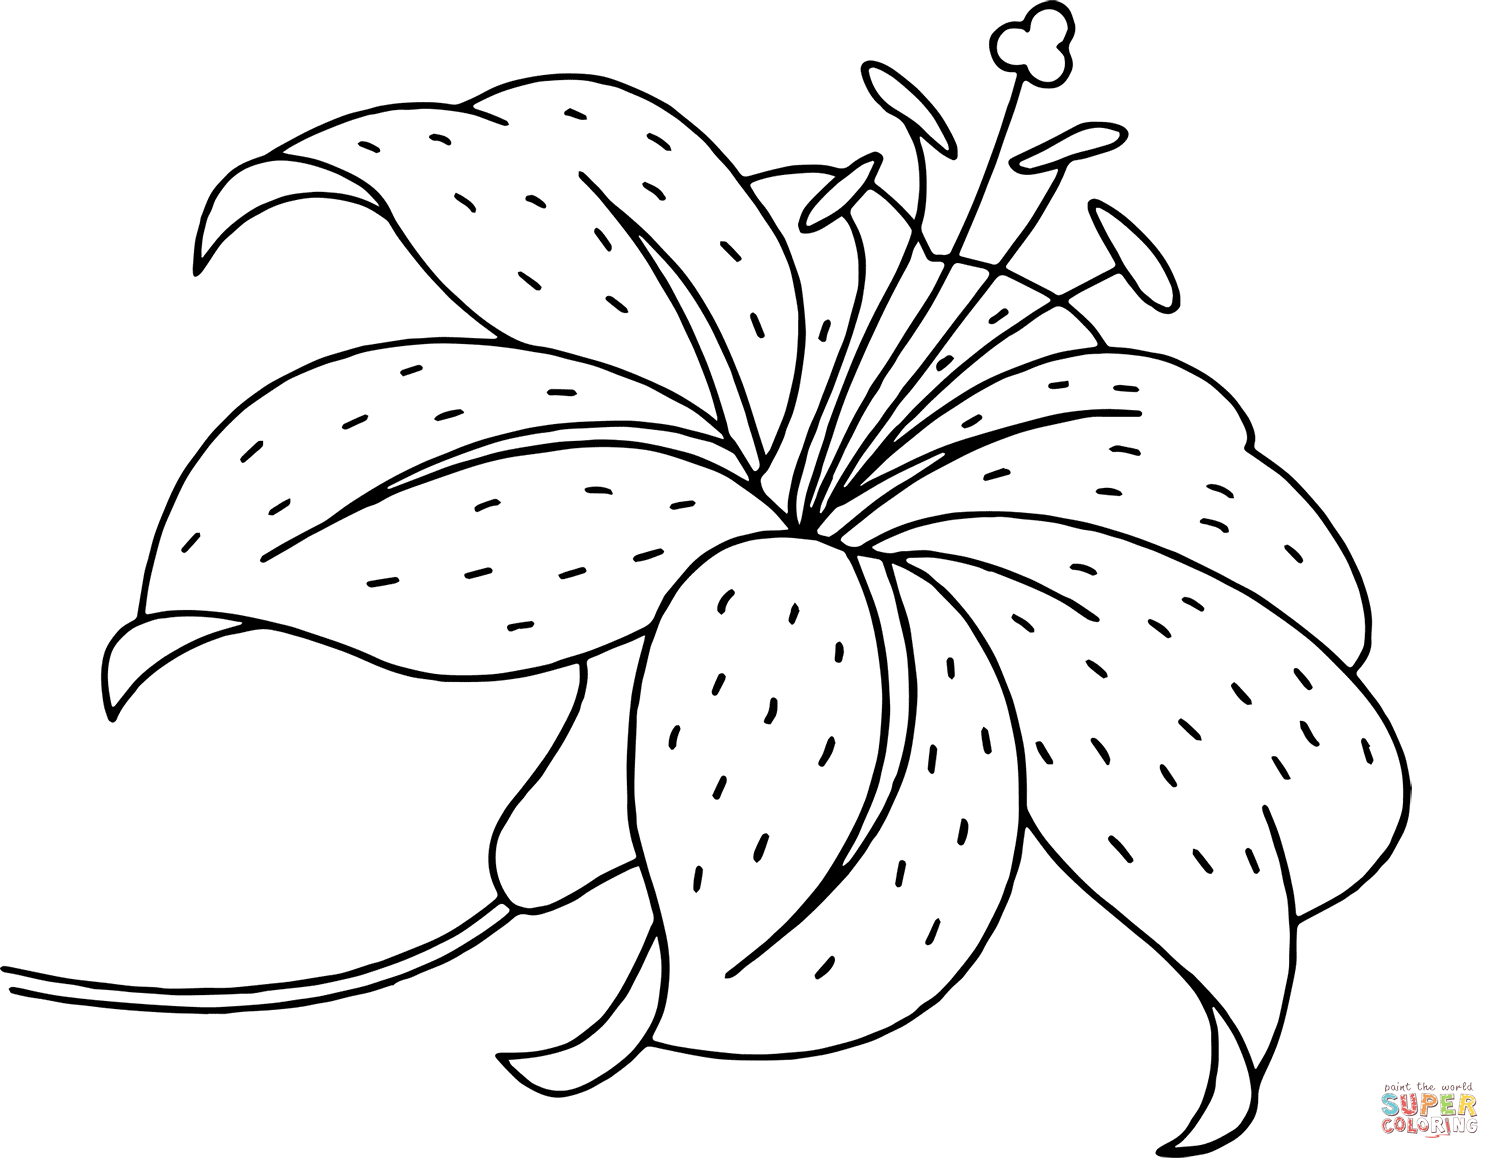 Bouquet Of Flowers Coloring Page Imagination Flower Coloring Images Lily Page Free Printable Pages